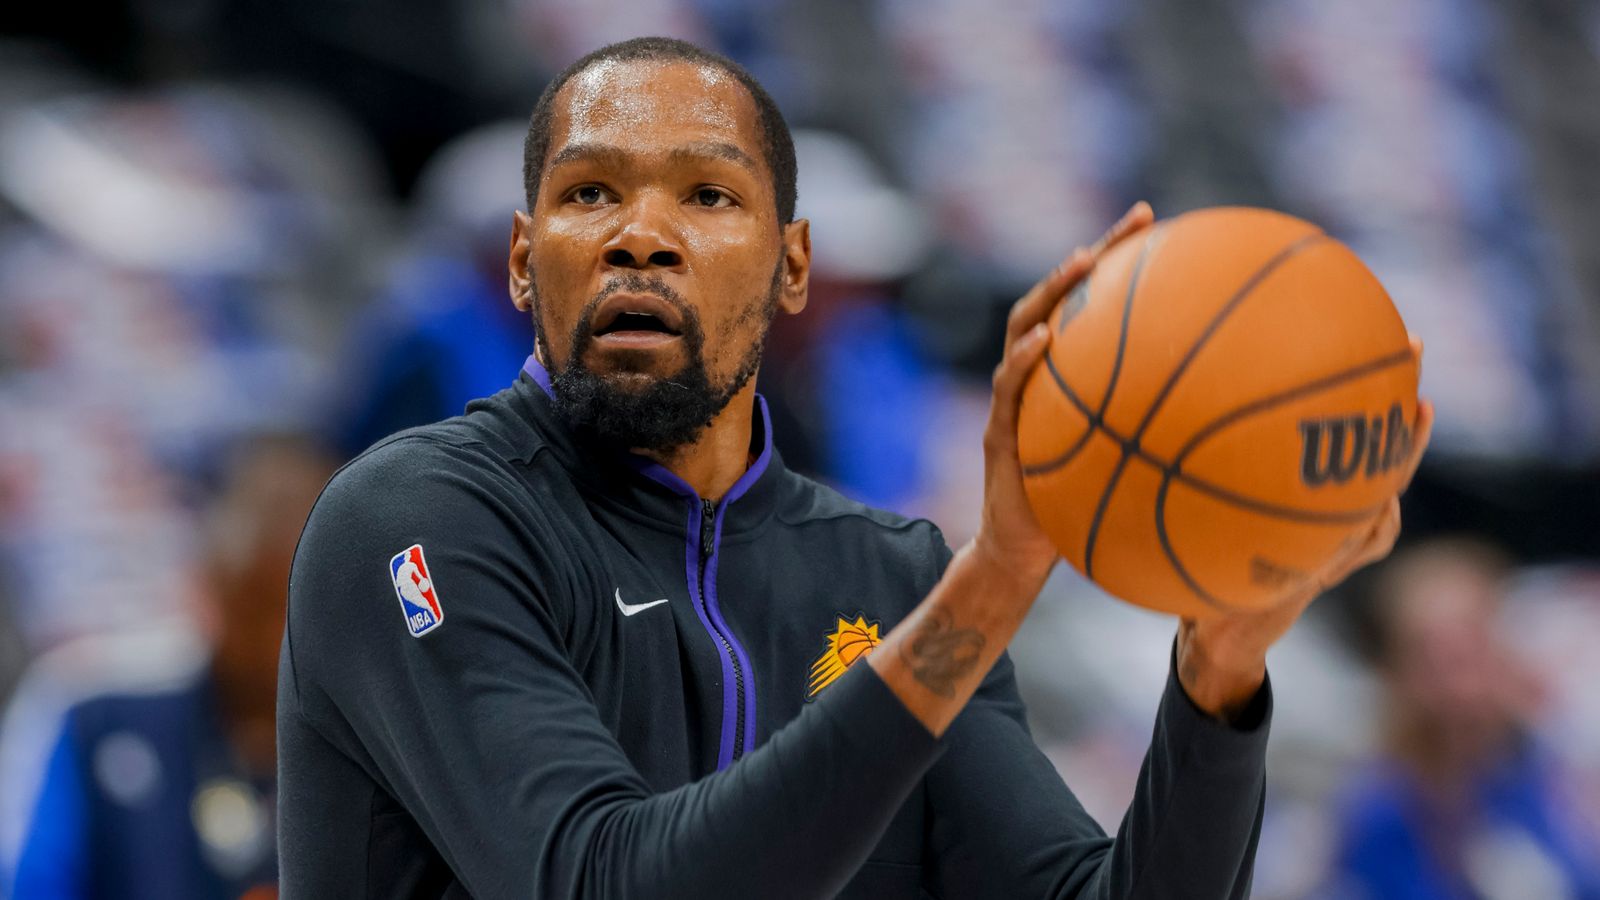 Kevin Durant settling in well with the Phoenix Suns after first